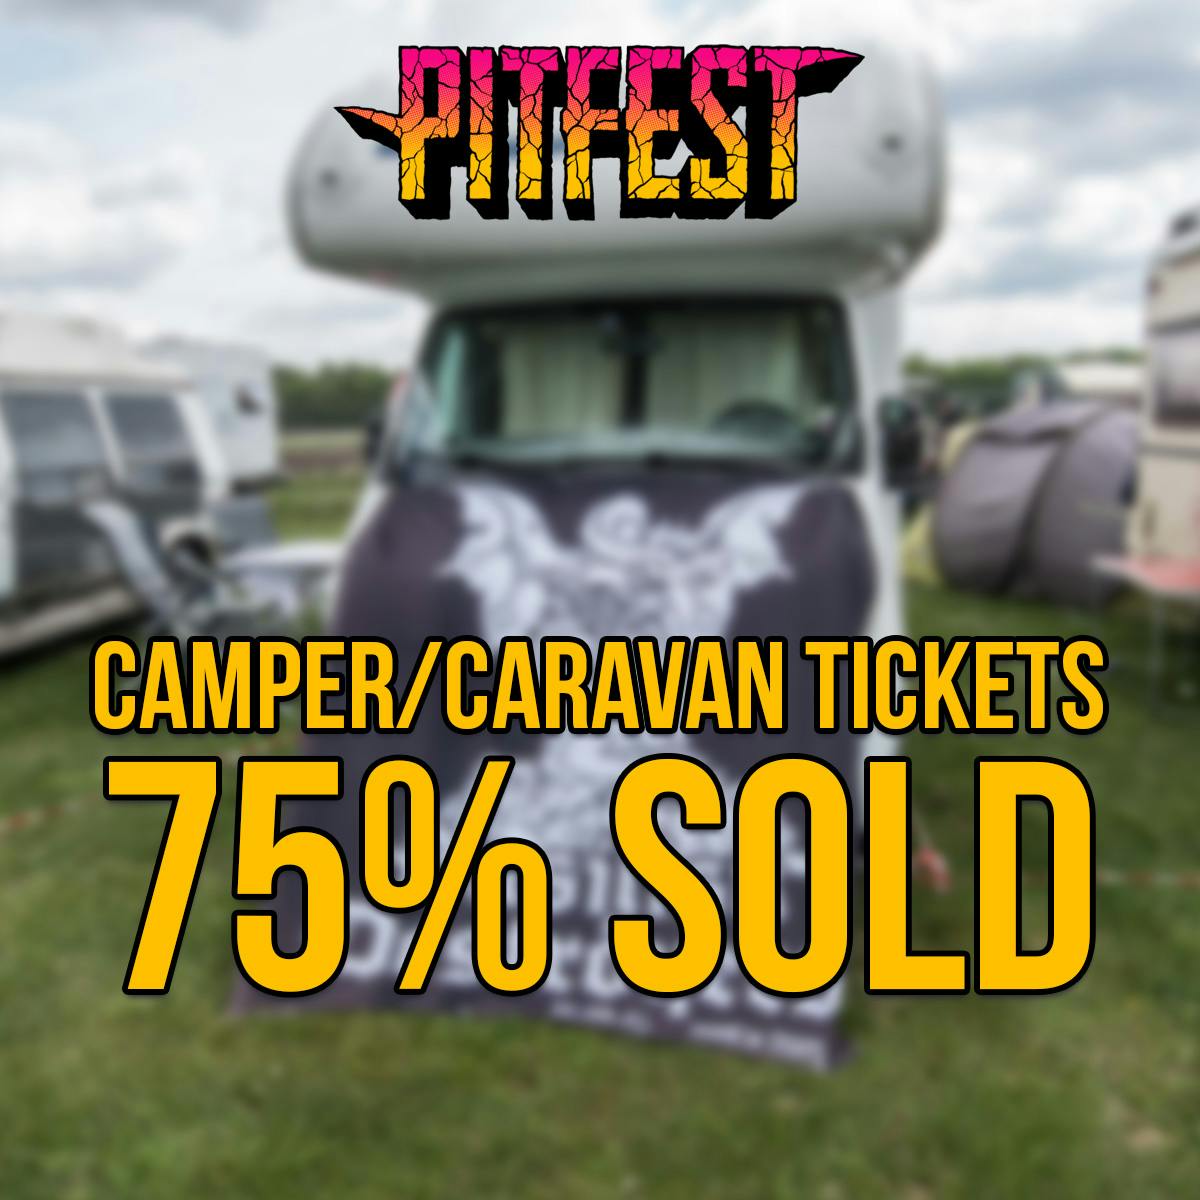 Camper/Caravan tickets almost sold out